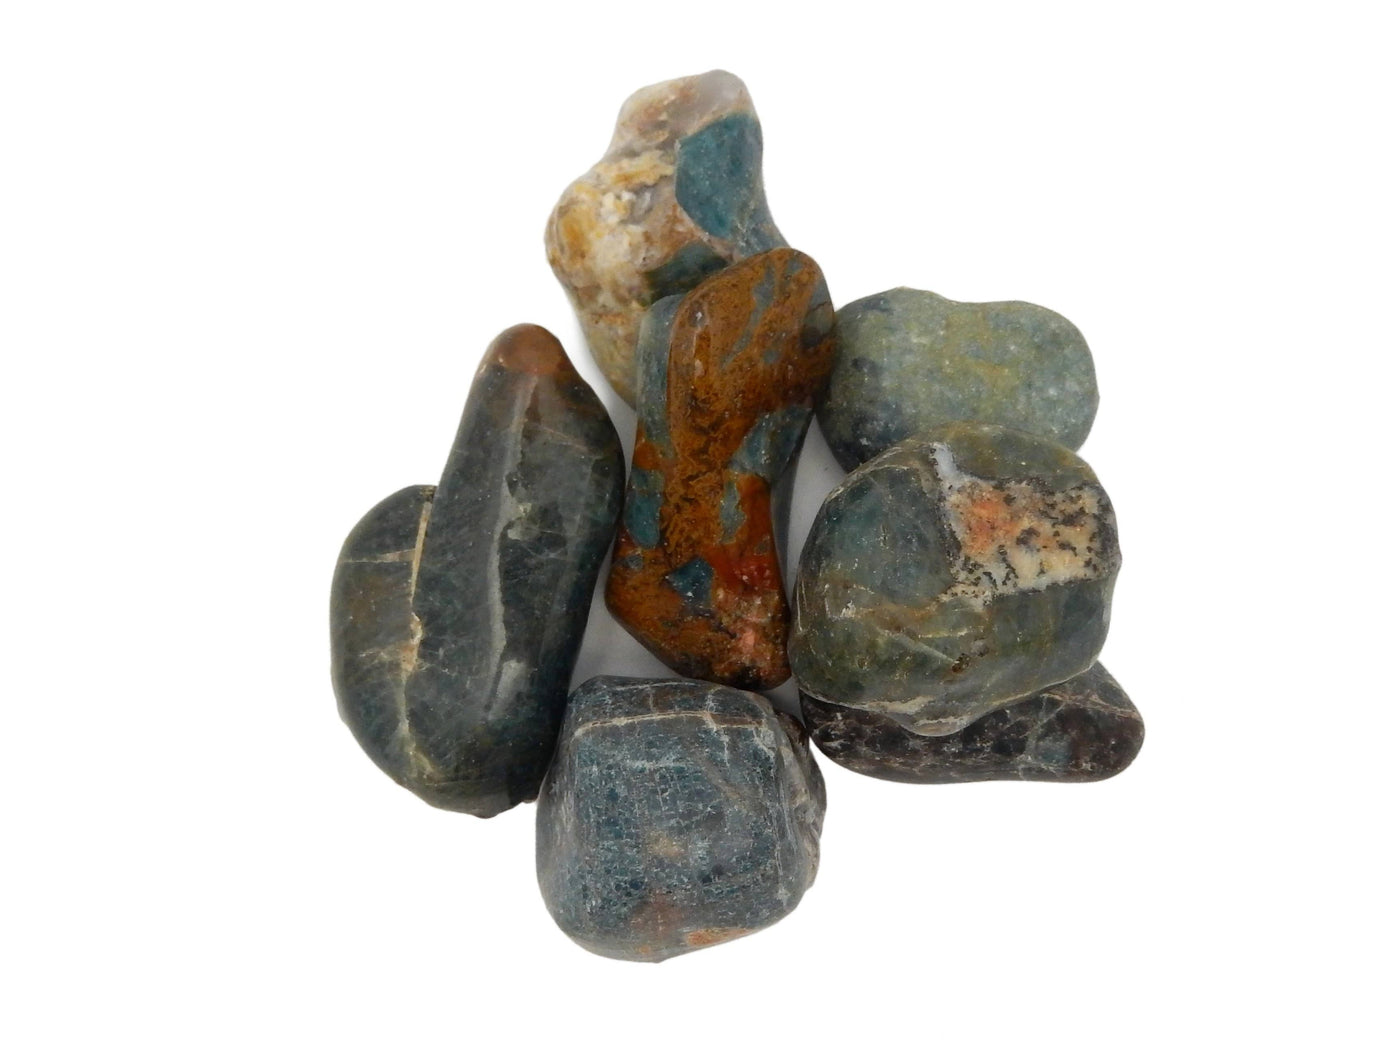 Blue apatite tumbled stones on a white background. Showing they are a dark grayish blue with some brown and cream